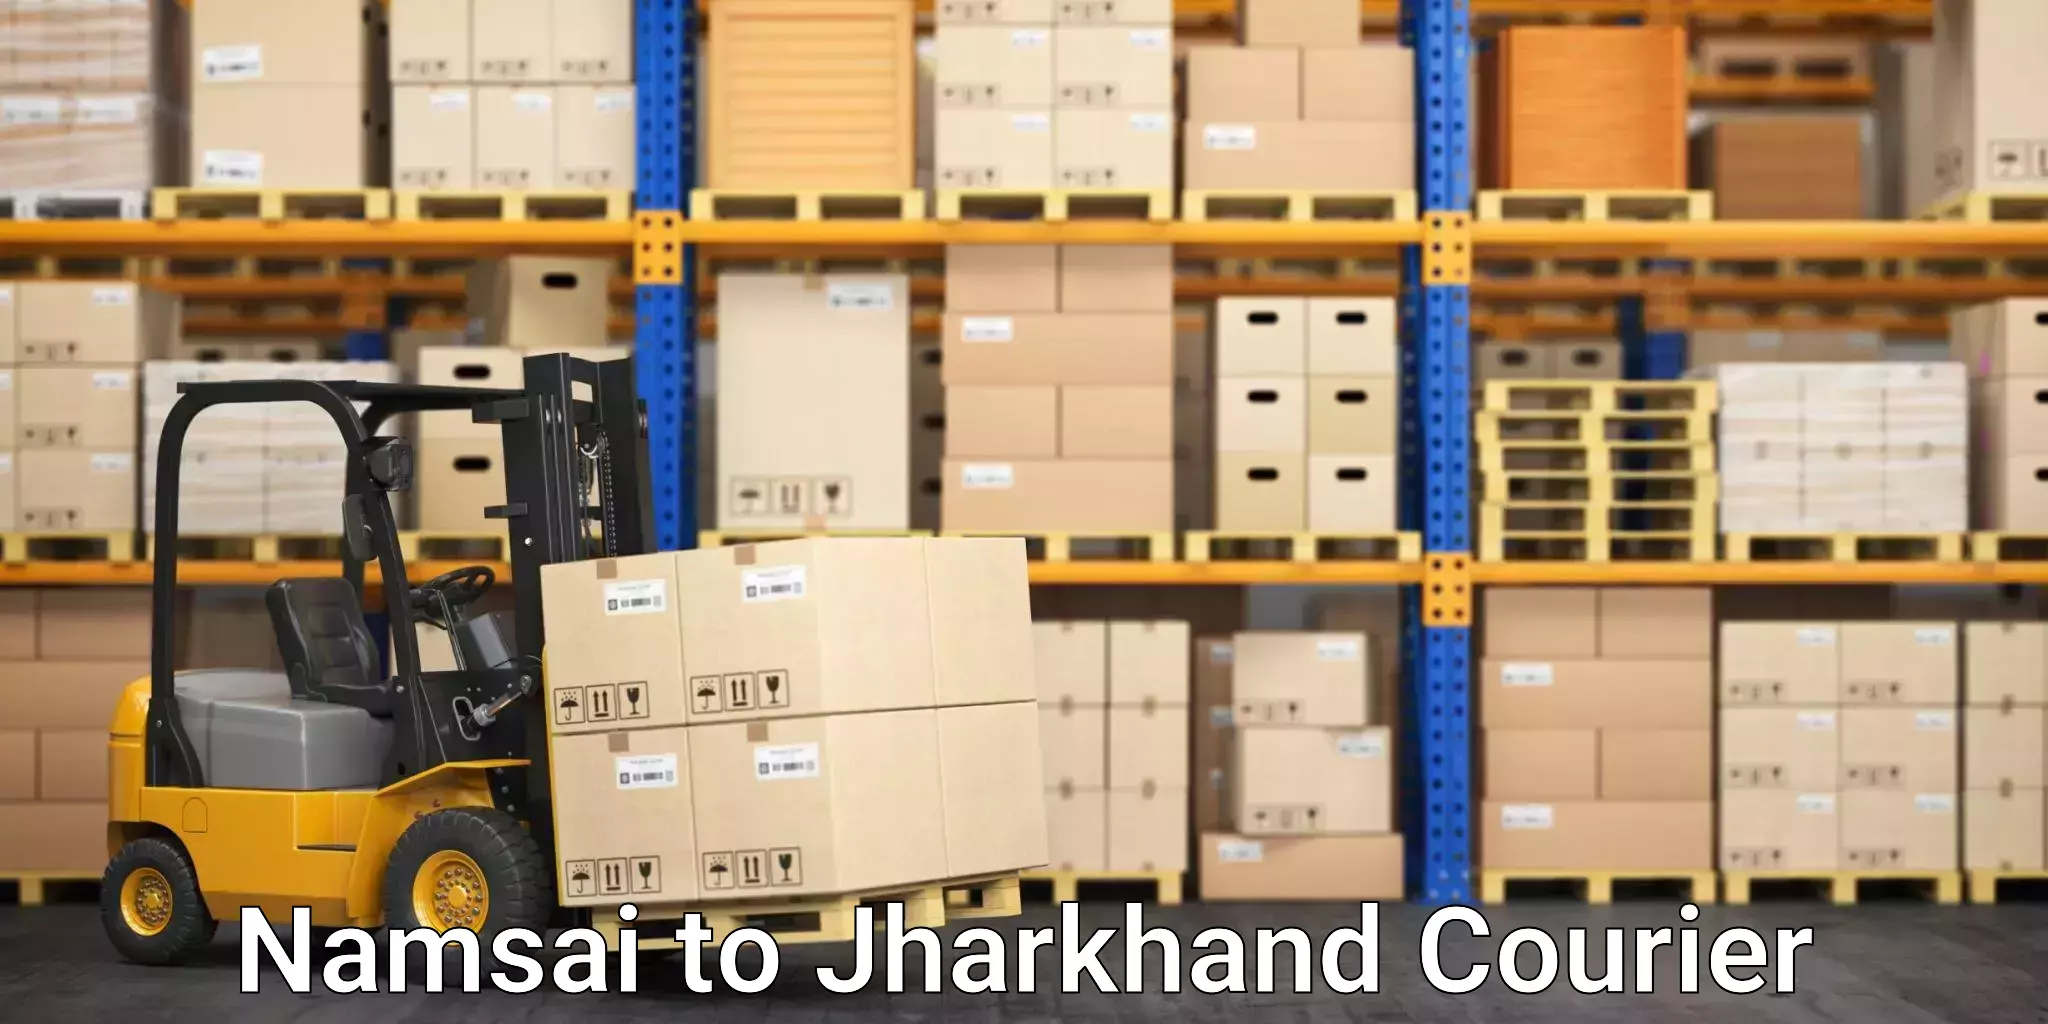 End-to-end delivery Namsai to Jharkhand